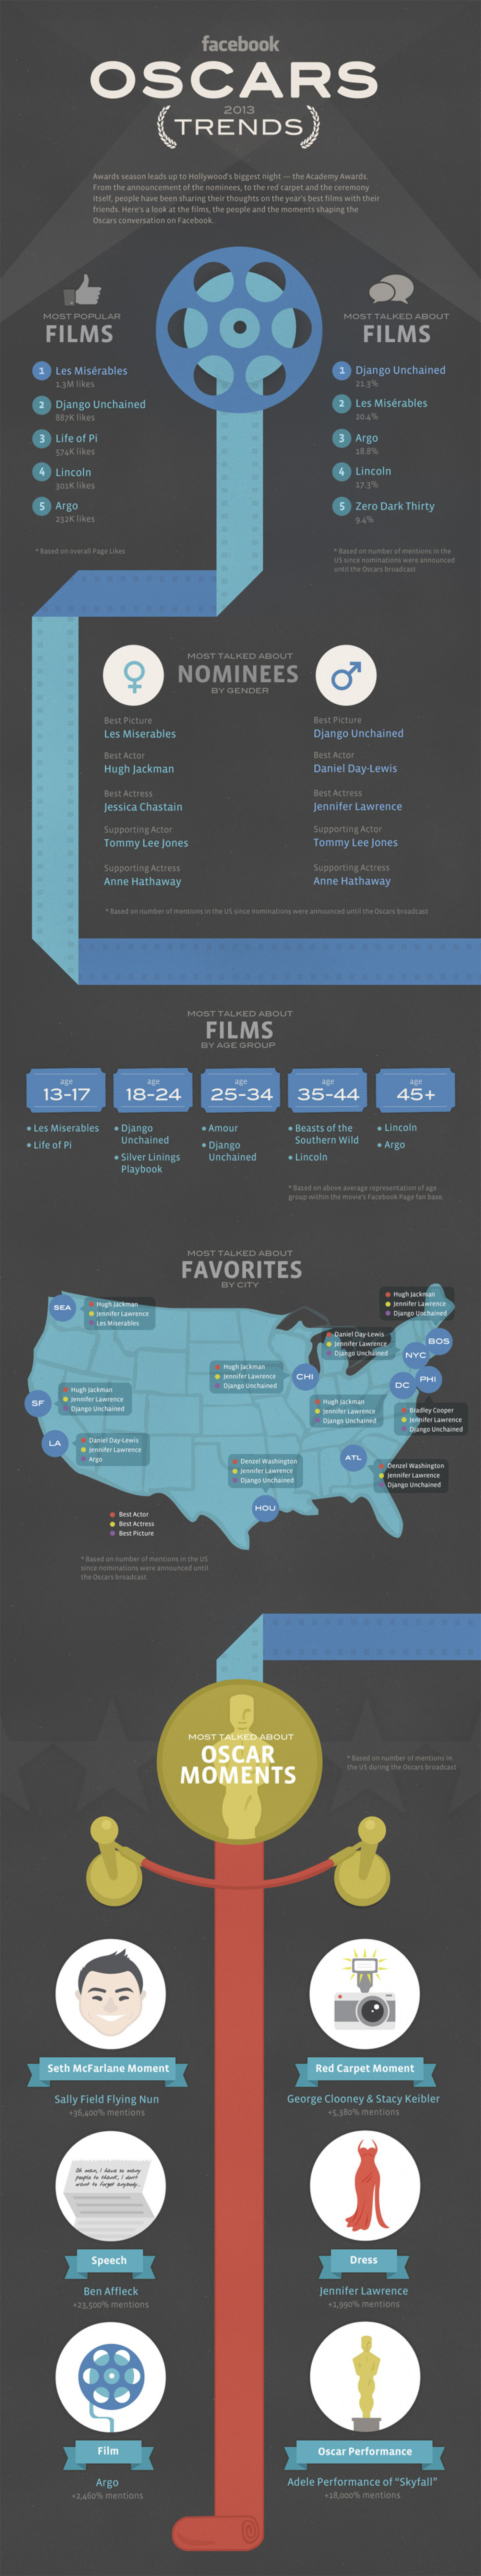 Facebook Oscars 2013 Trends Infographic